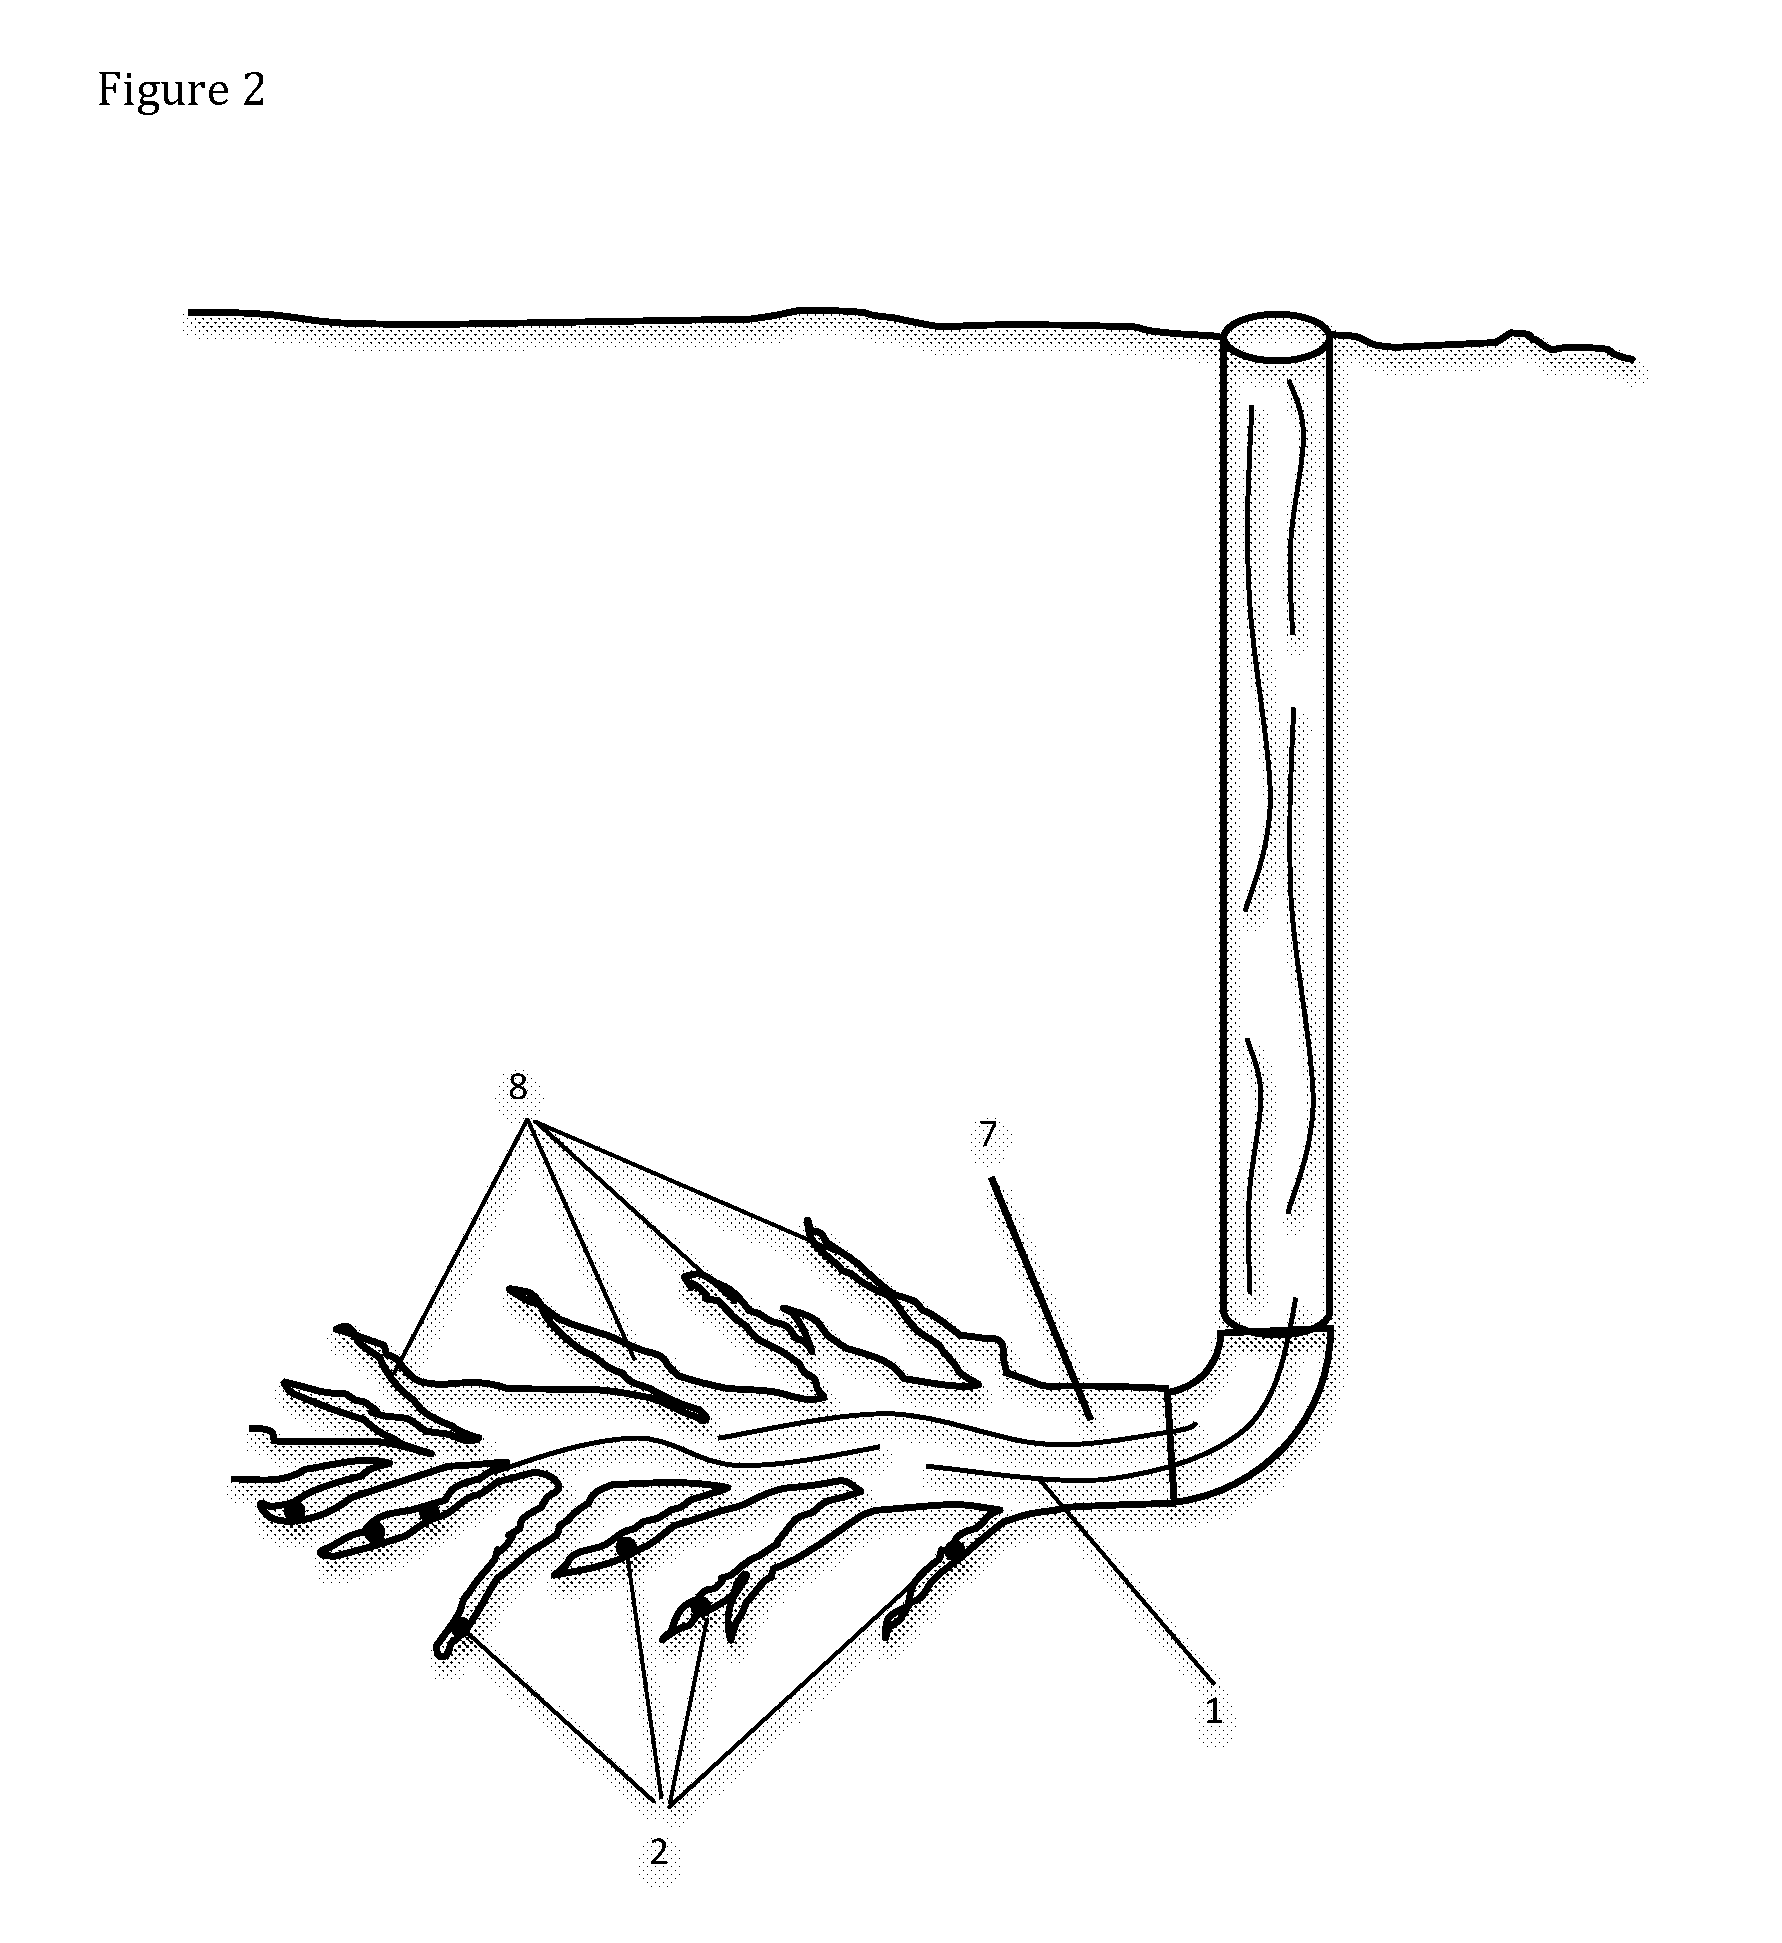 A proppant immobilized enzyme and a visofied fracture fluid